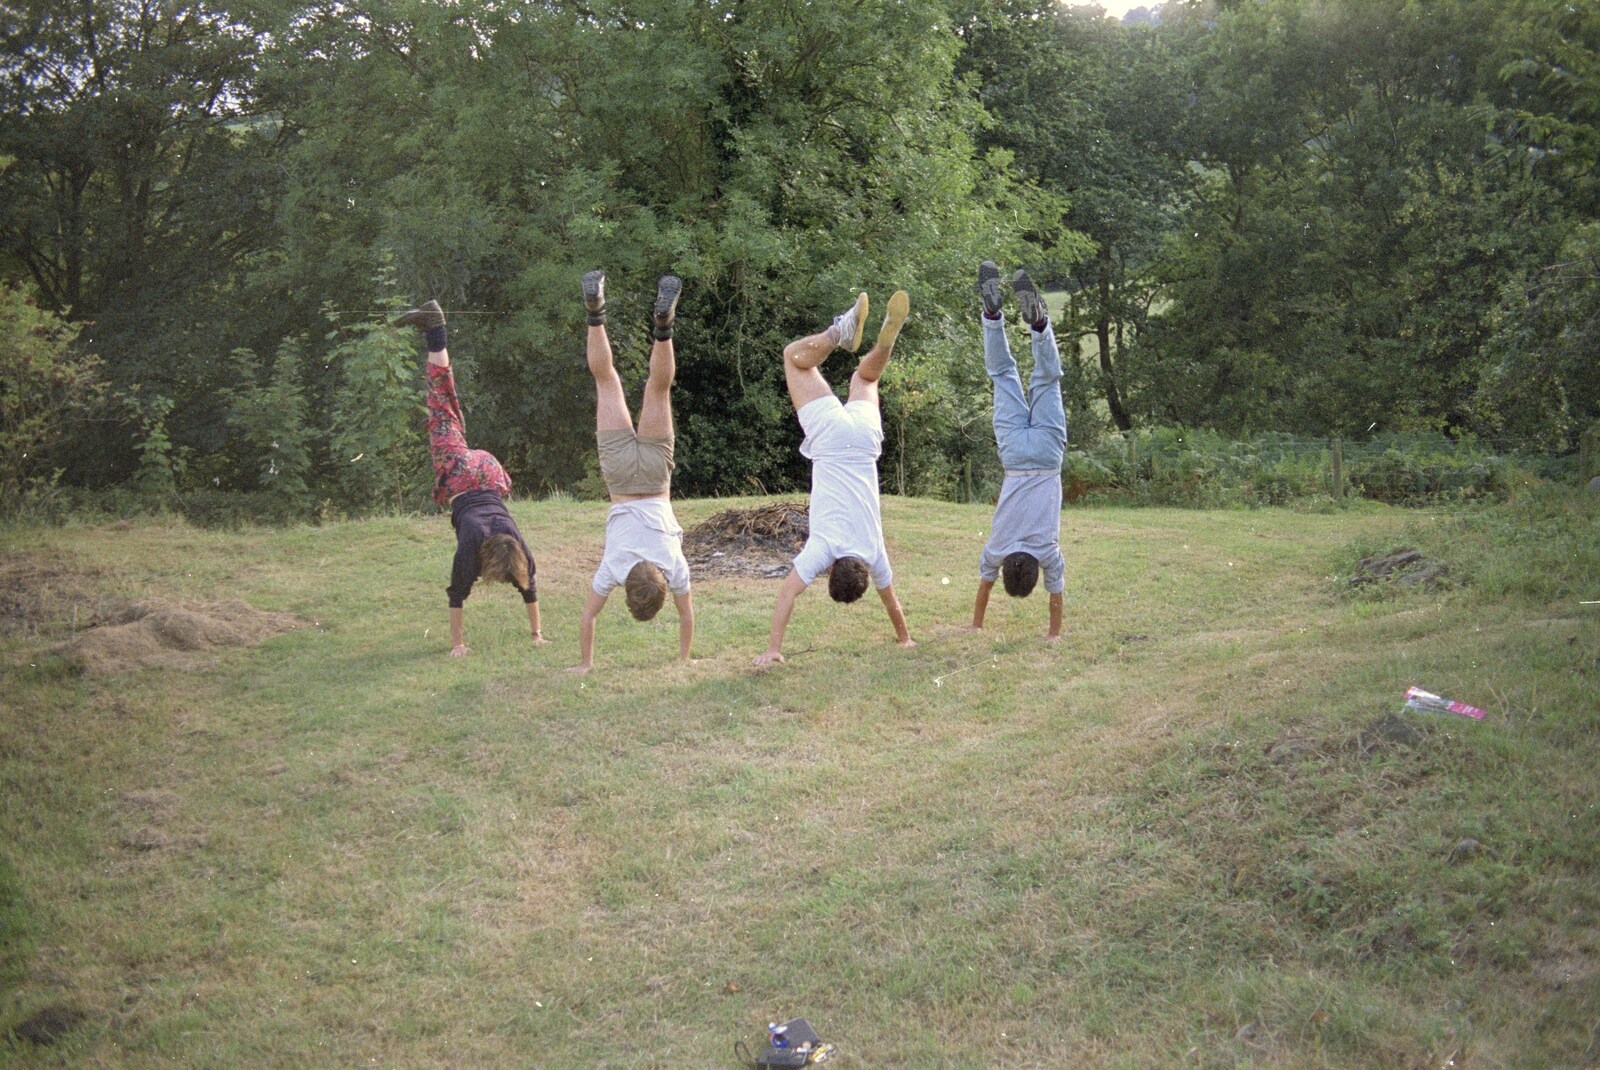 Liz's Party, Abergavenny, Monmouthshire, Wales - 4th August 1990: Four hand-standers in a row